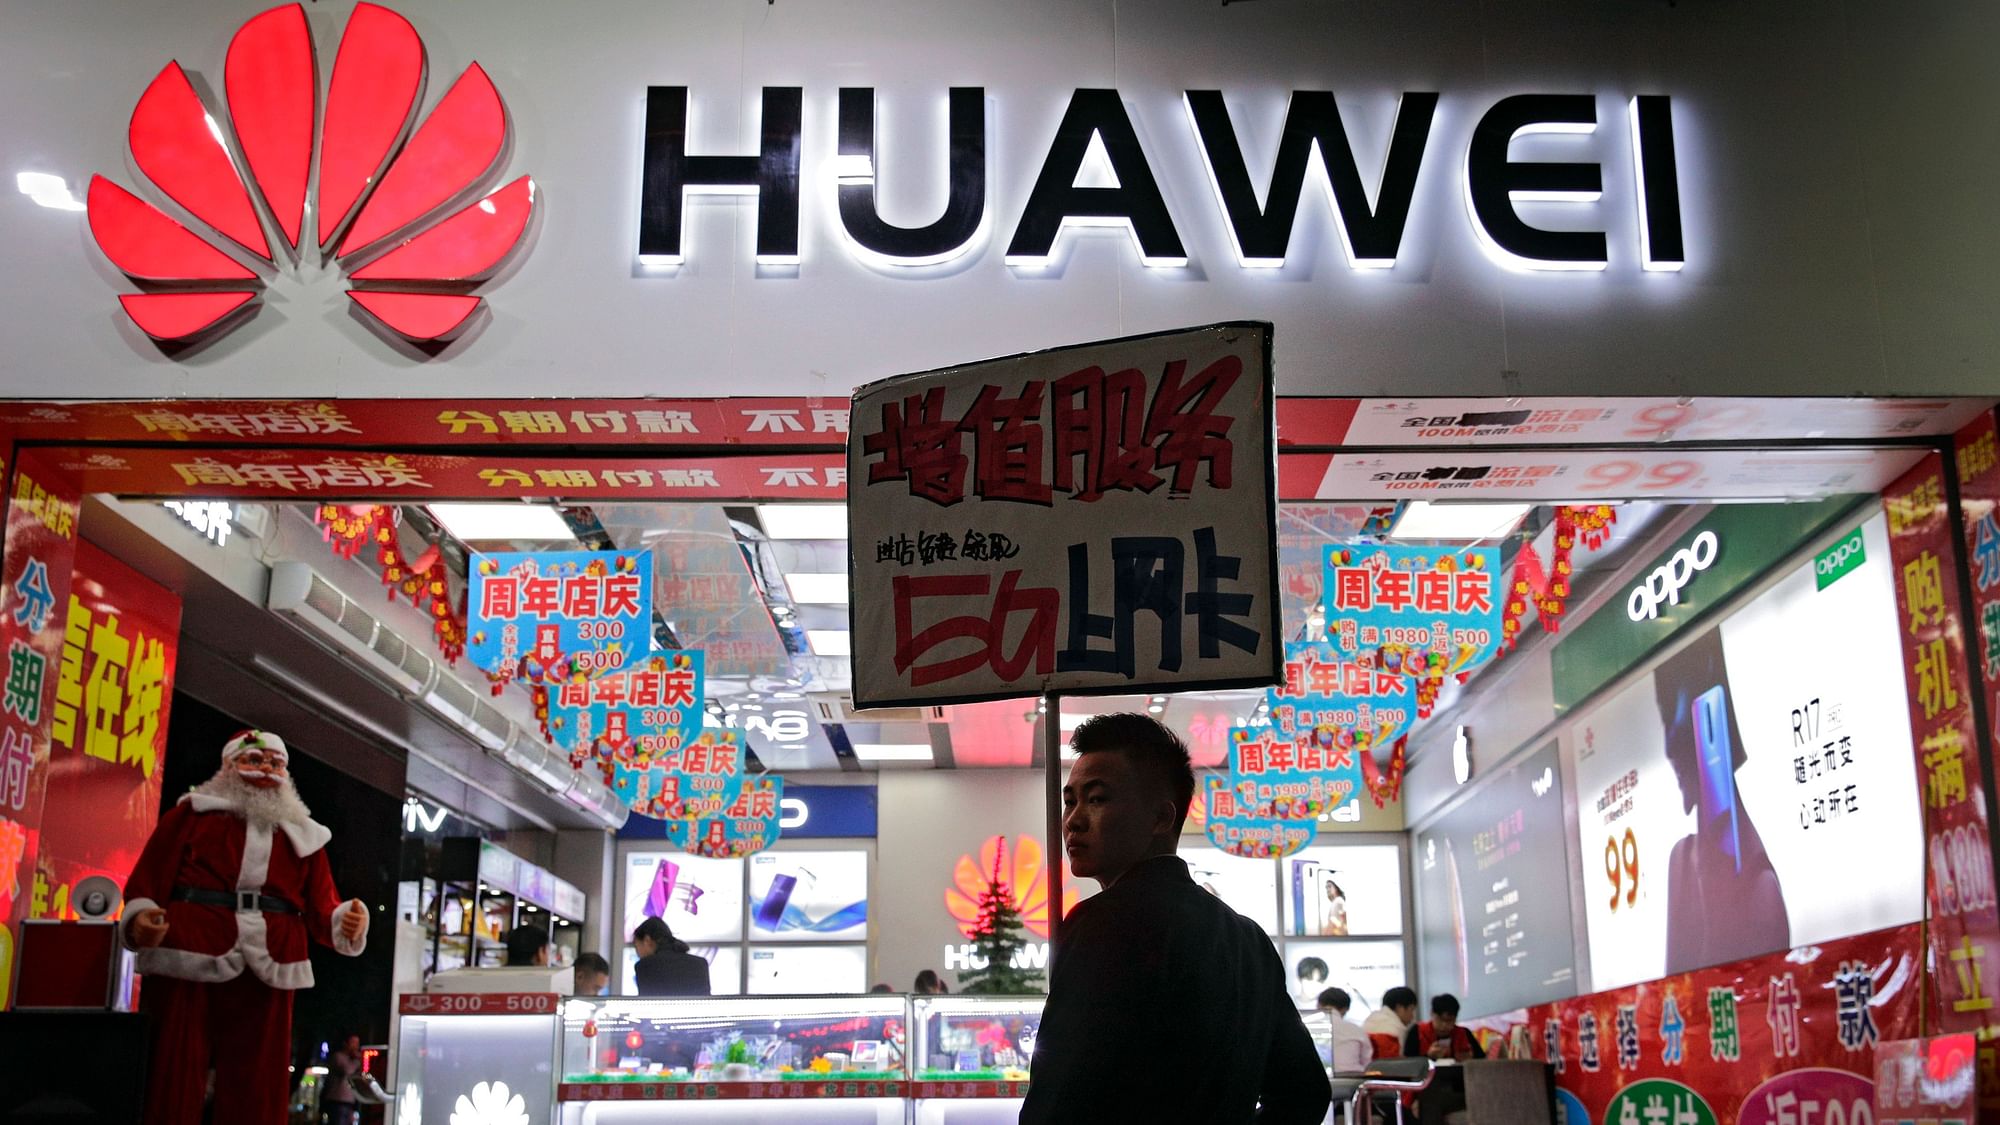 Huawei is under scrutiny around the globe over concerns regarding its close ties with the Chinese government.